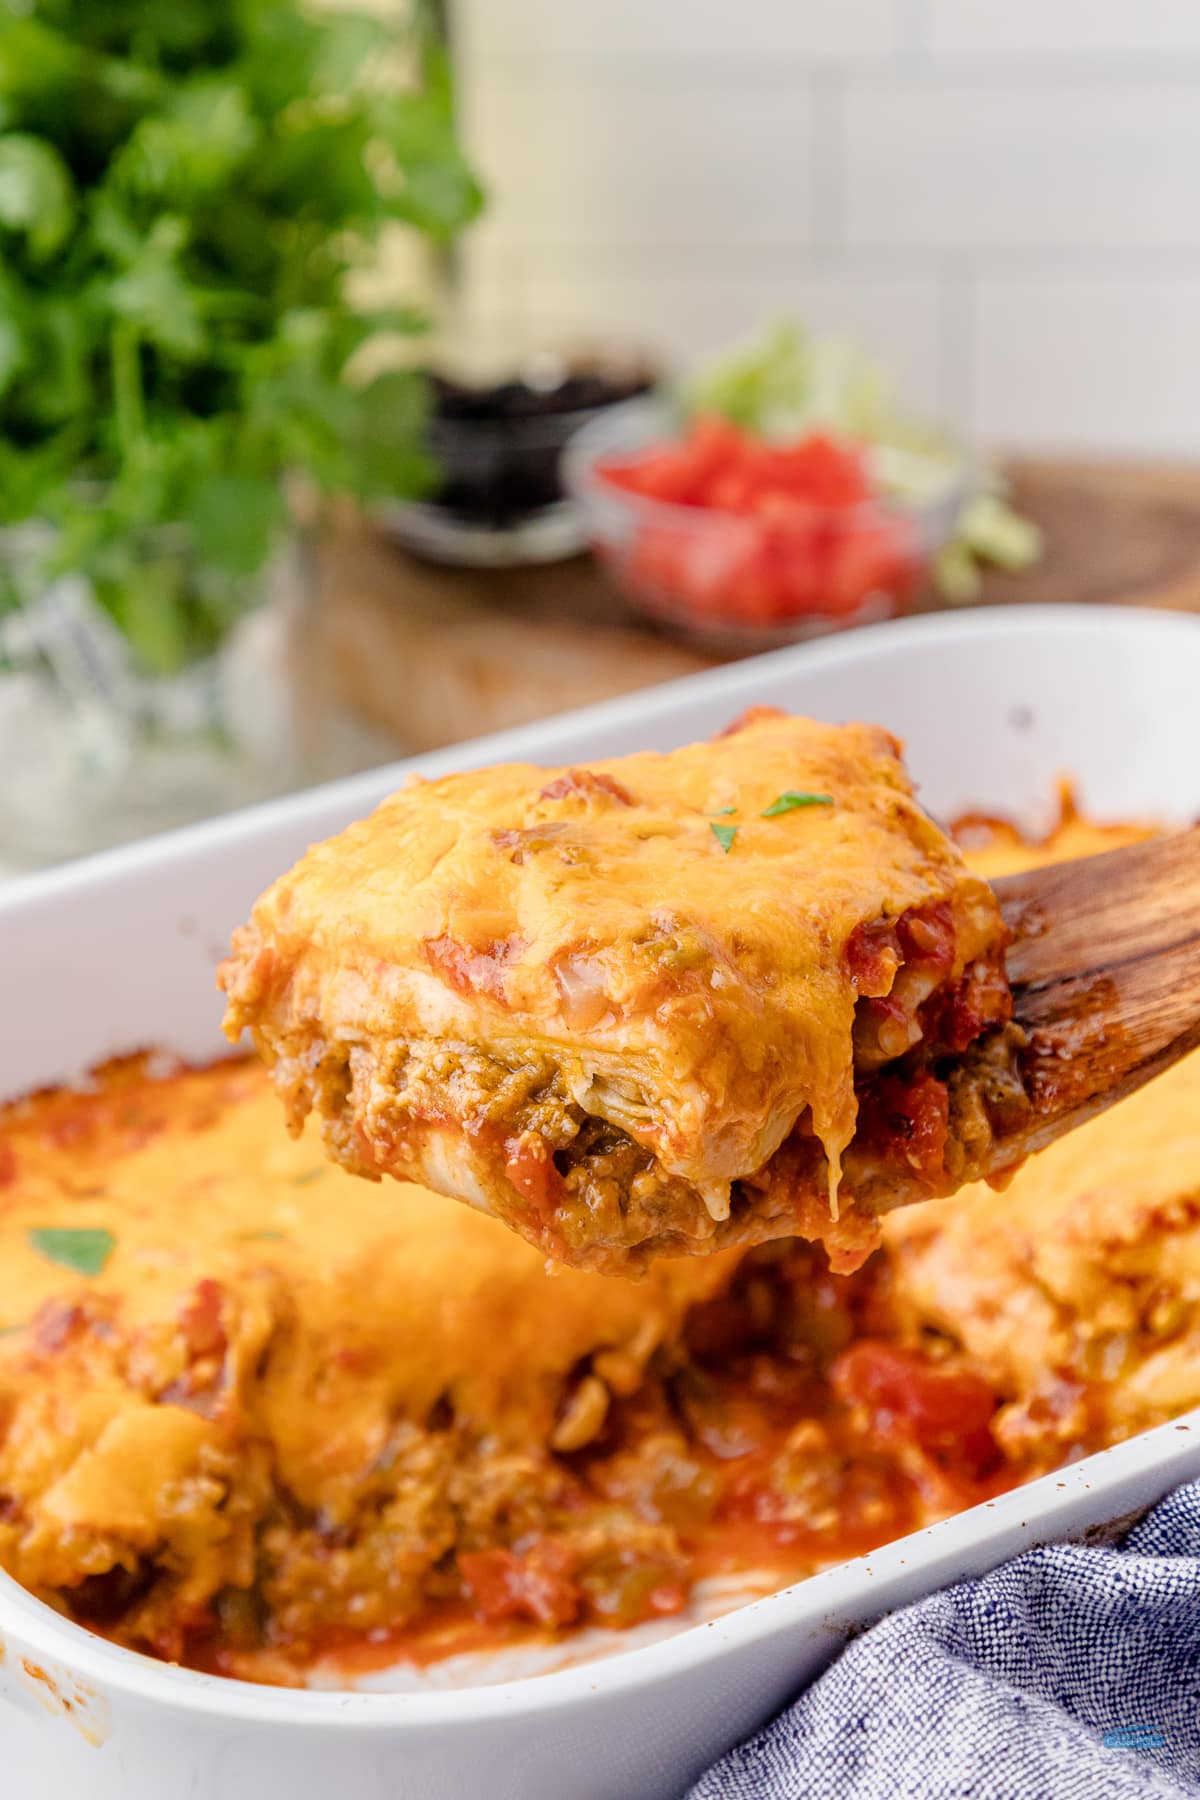 frozen burrito bake is an easy meal for busy weeknights.